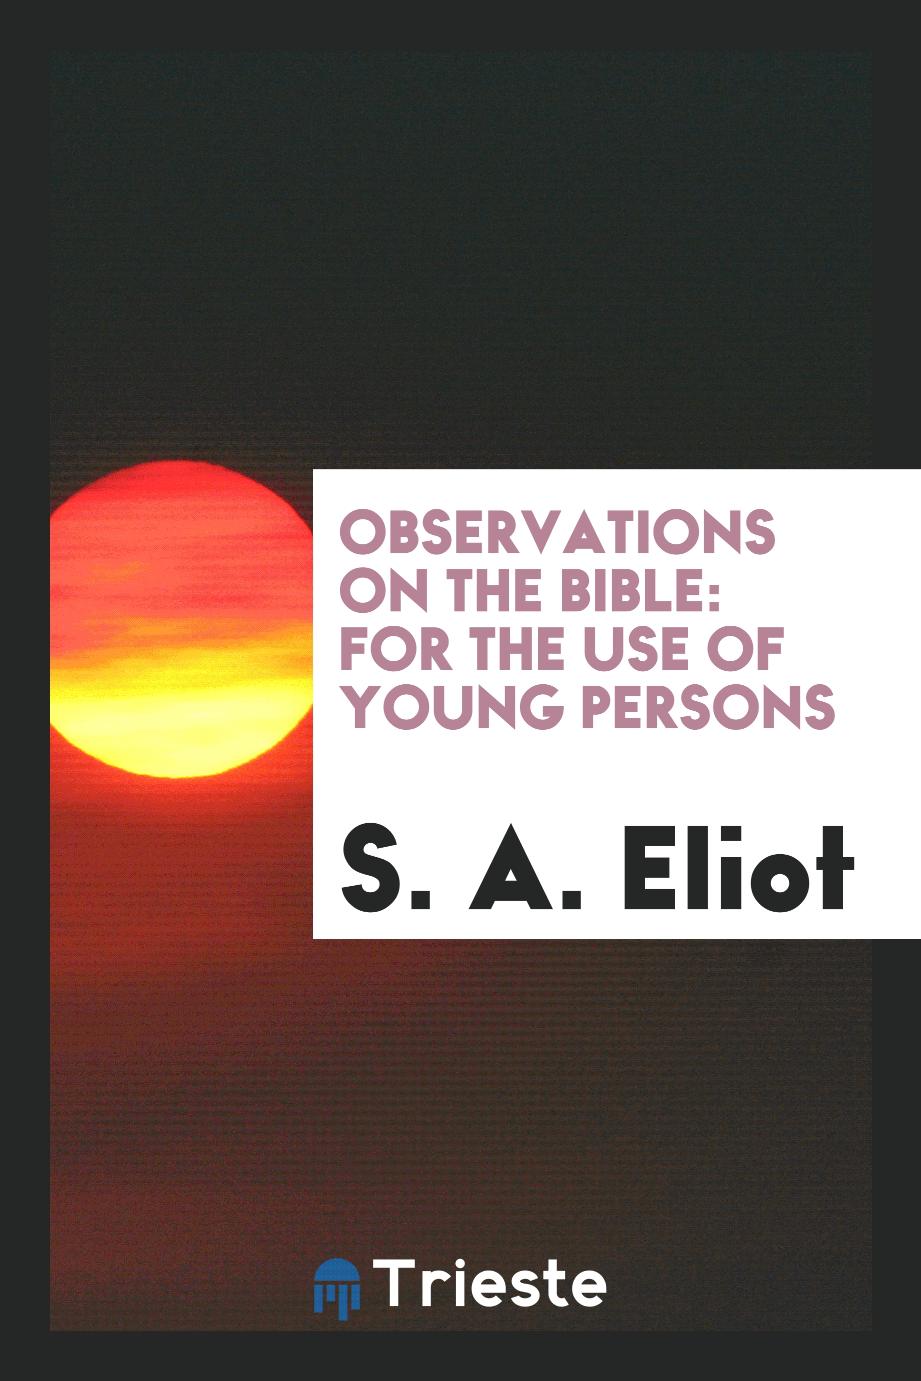 Observations on the Bible: for the use of young persons